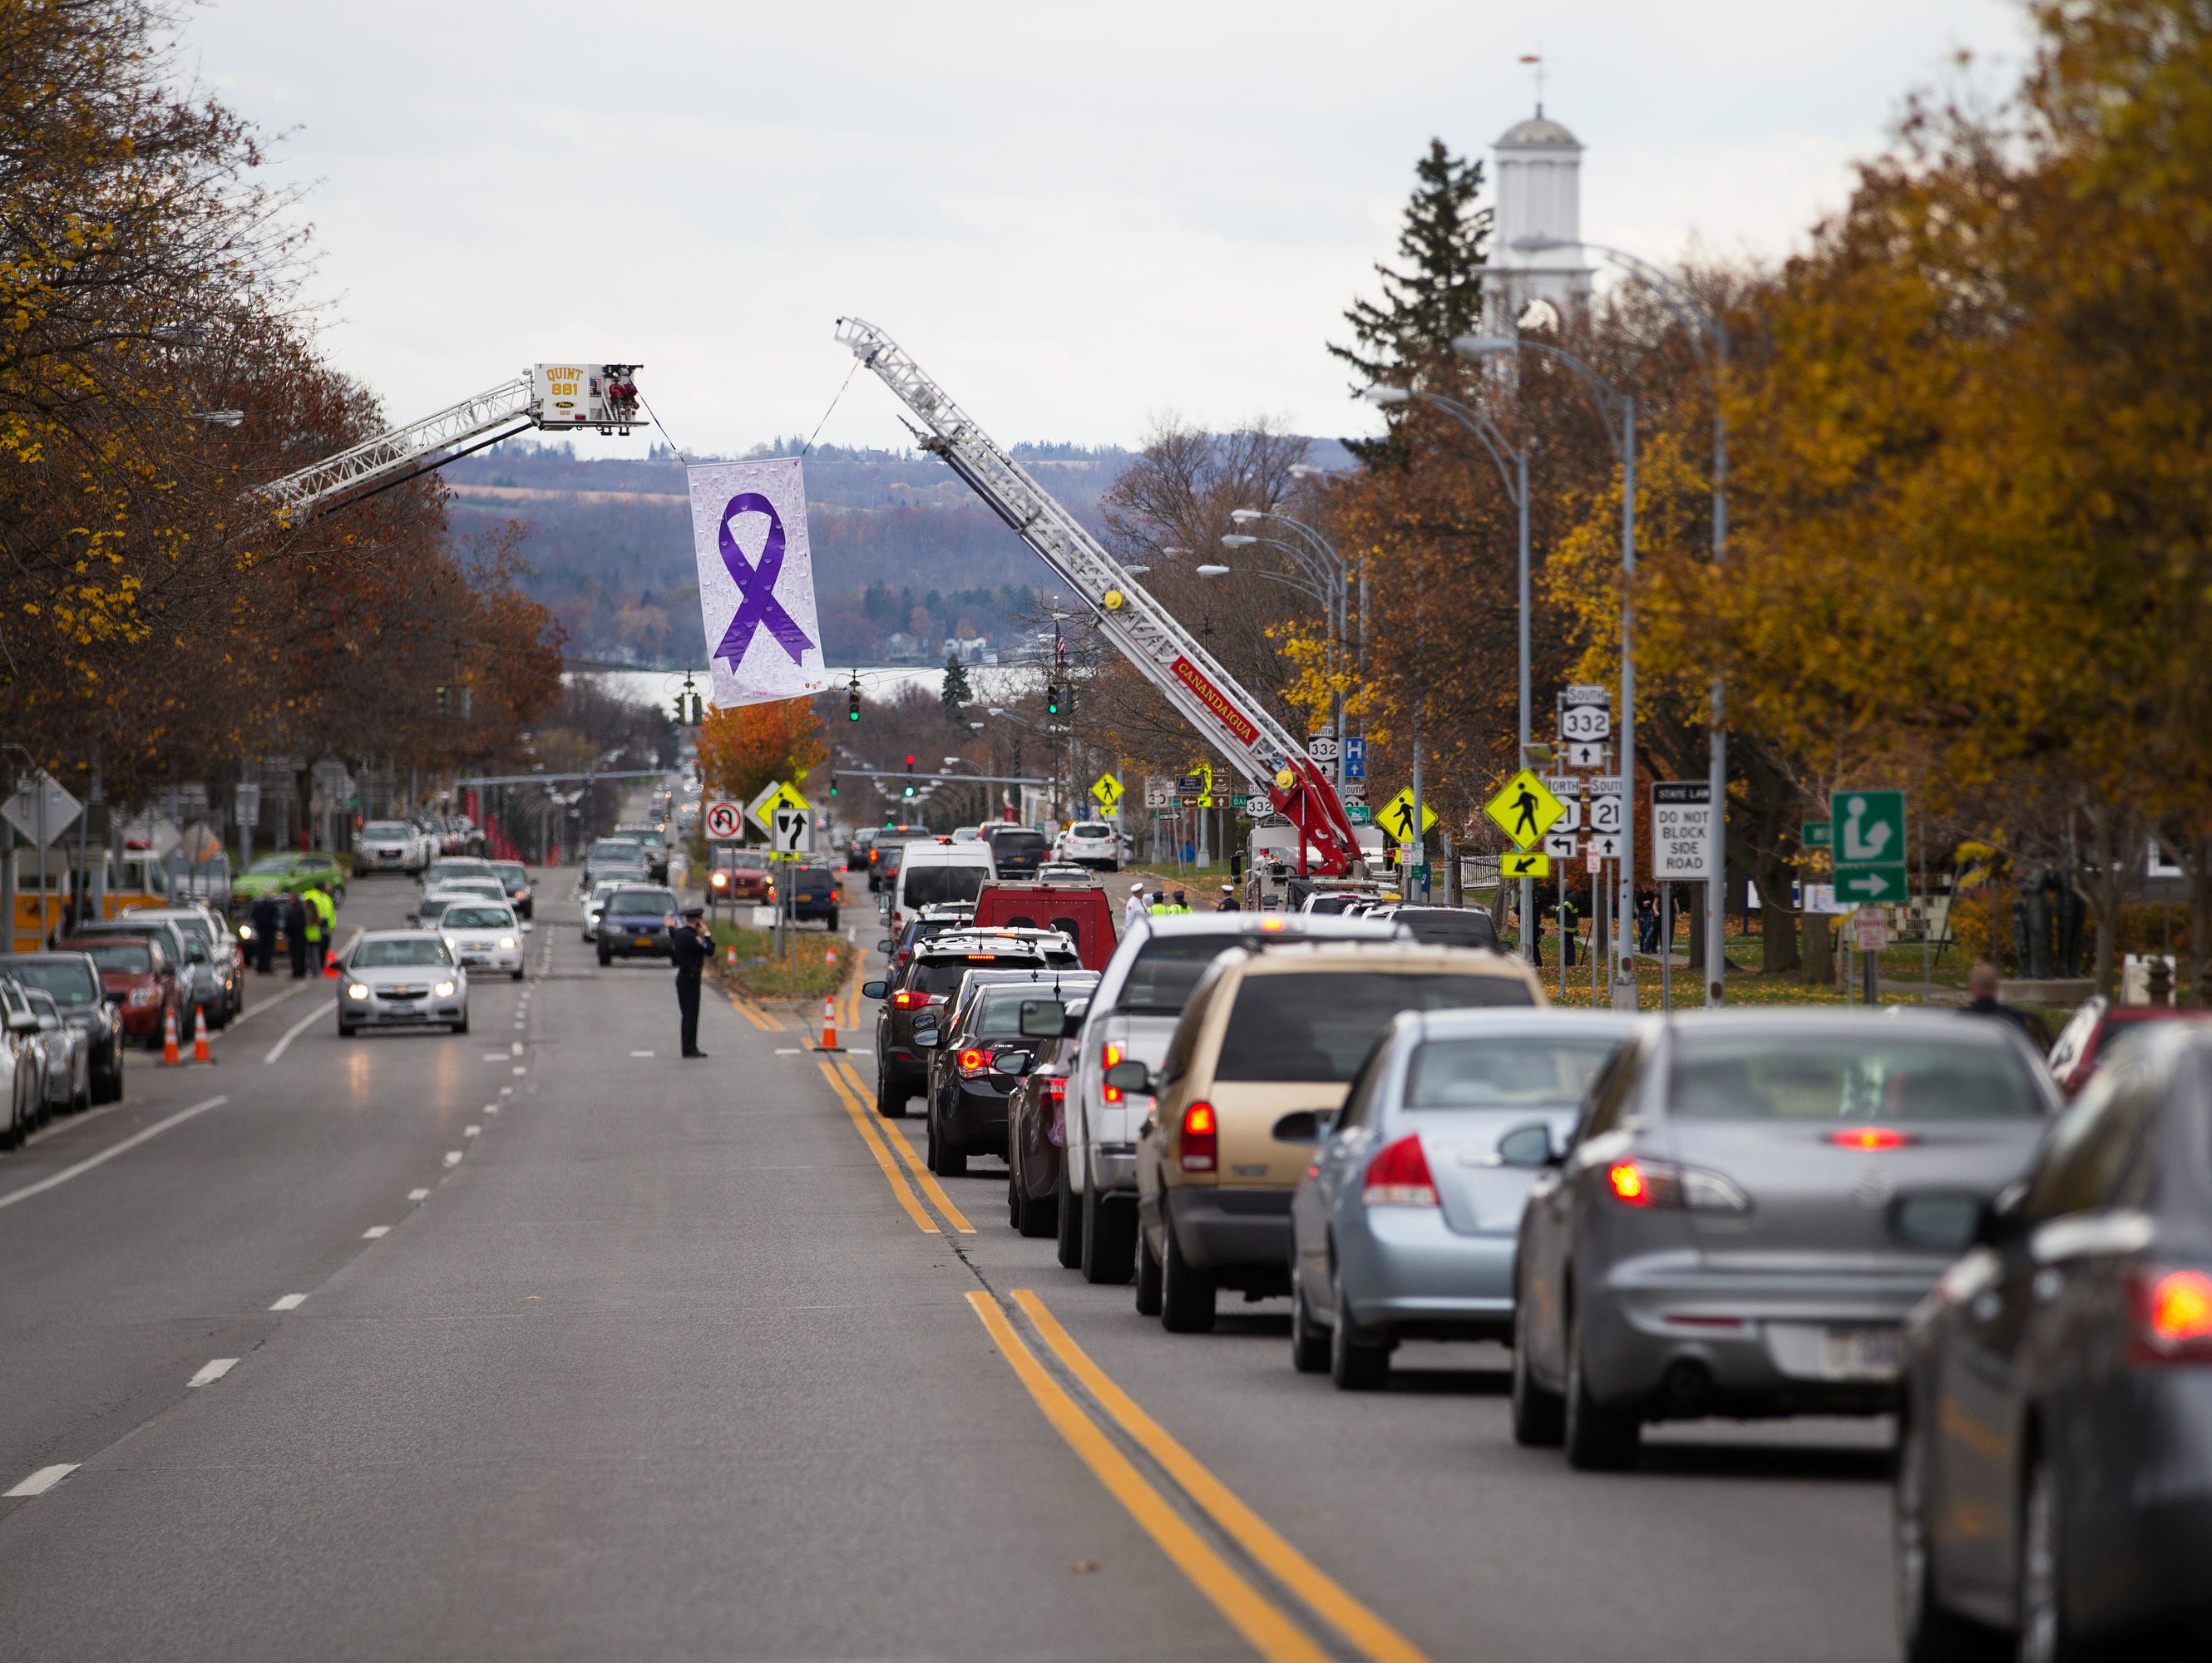 Traffic is backed up leading into downtown Canandaigua prior to Courtney Wagner's funeral on Saturday, November 7, 2015.